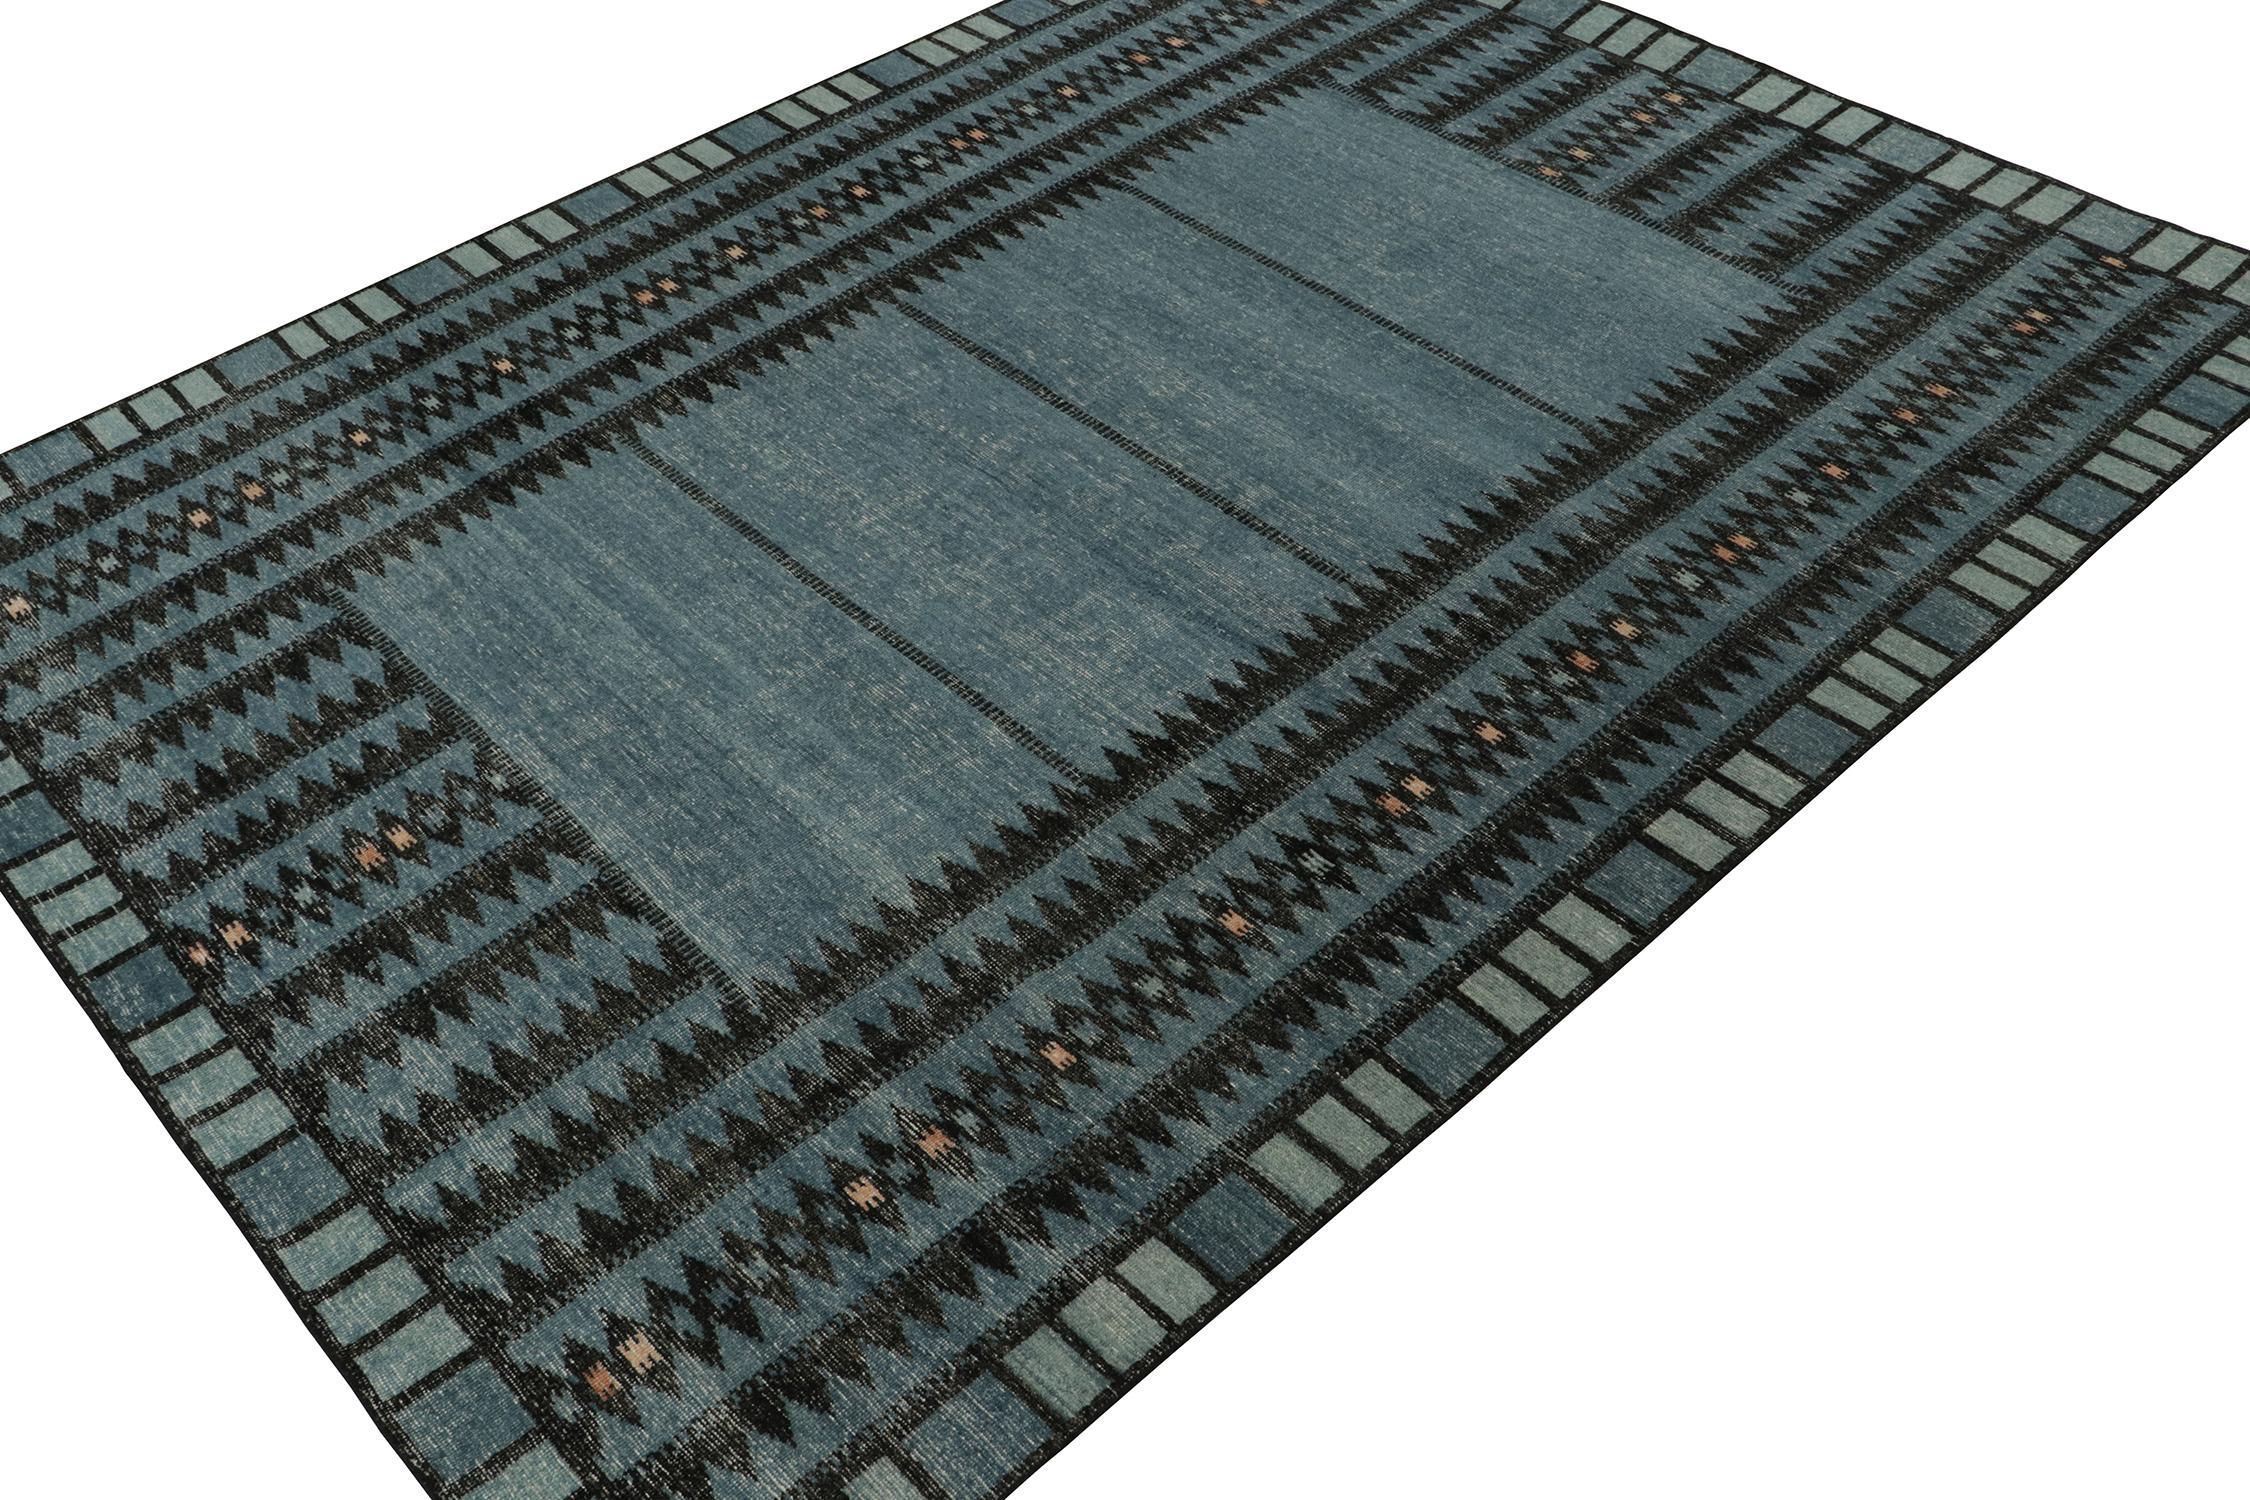 ??A 9x12 modern rug, hand-knotted in distressed style wool and cotton from Rug & Kilim’s Homage Collection.

Further on the Design:

This design recaptured mid-century Scandinavian rug designs, and favors blue and black geometric patterns with rust